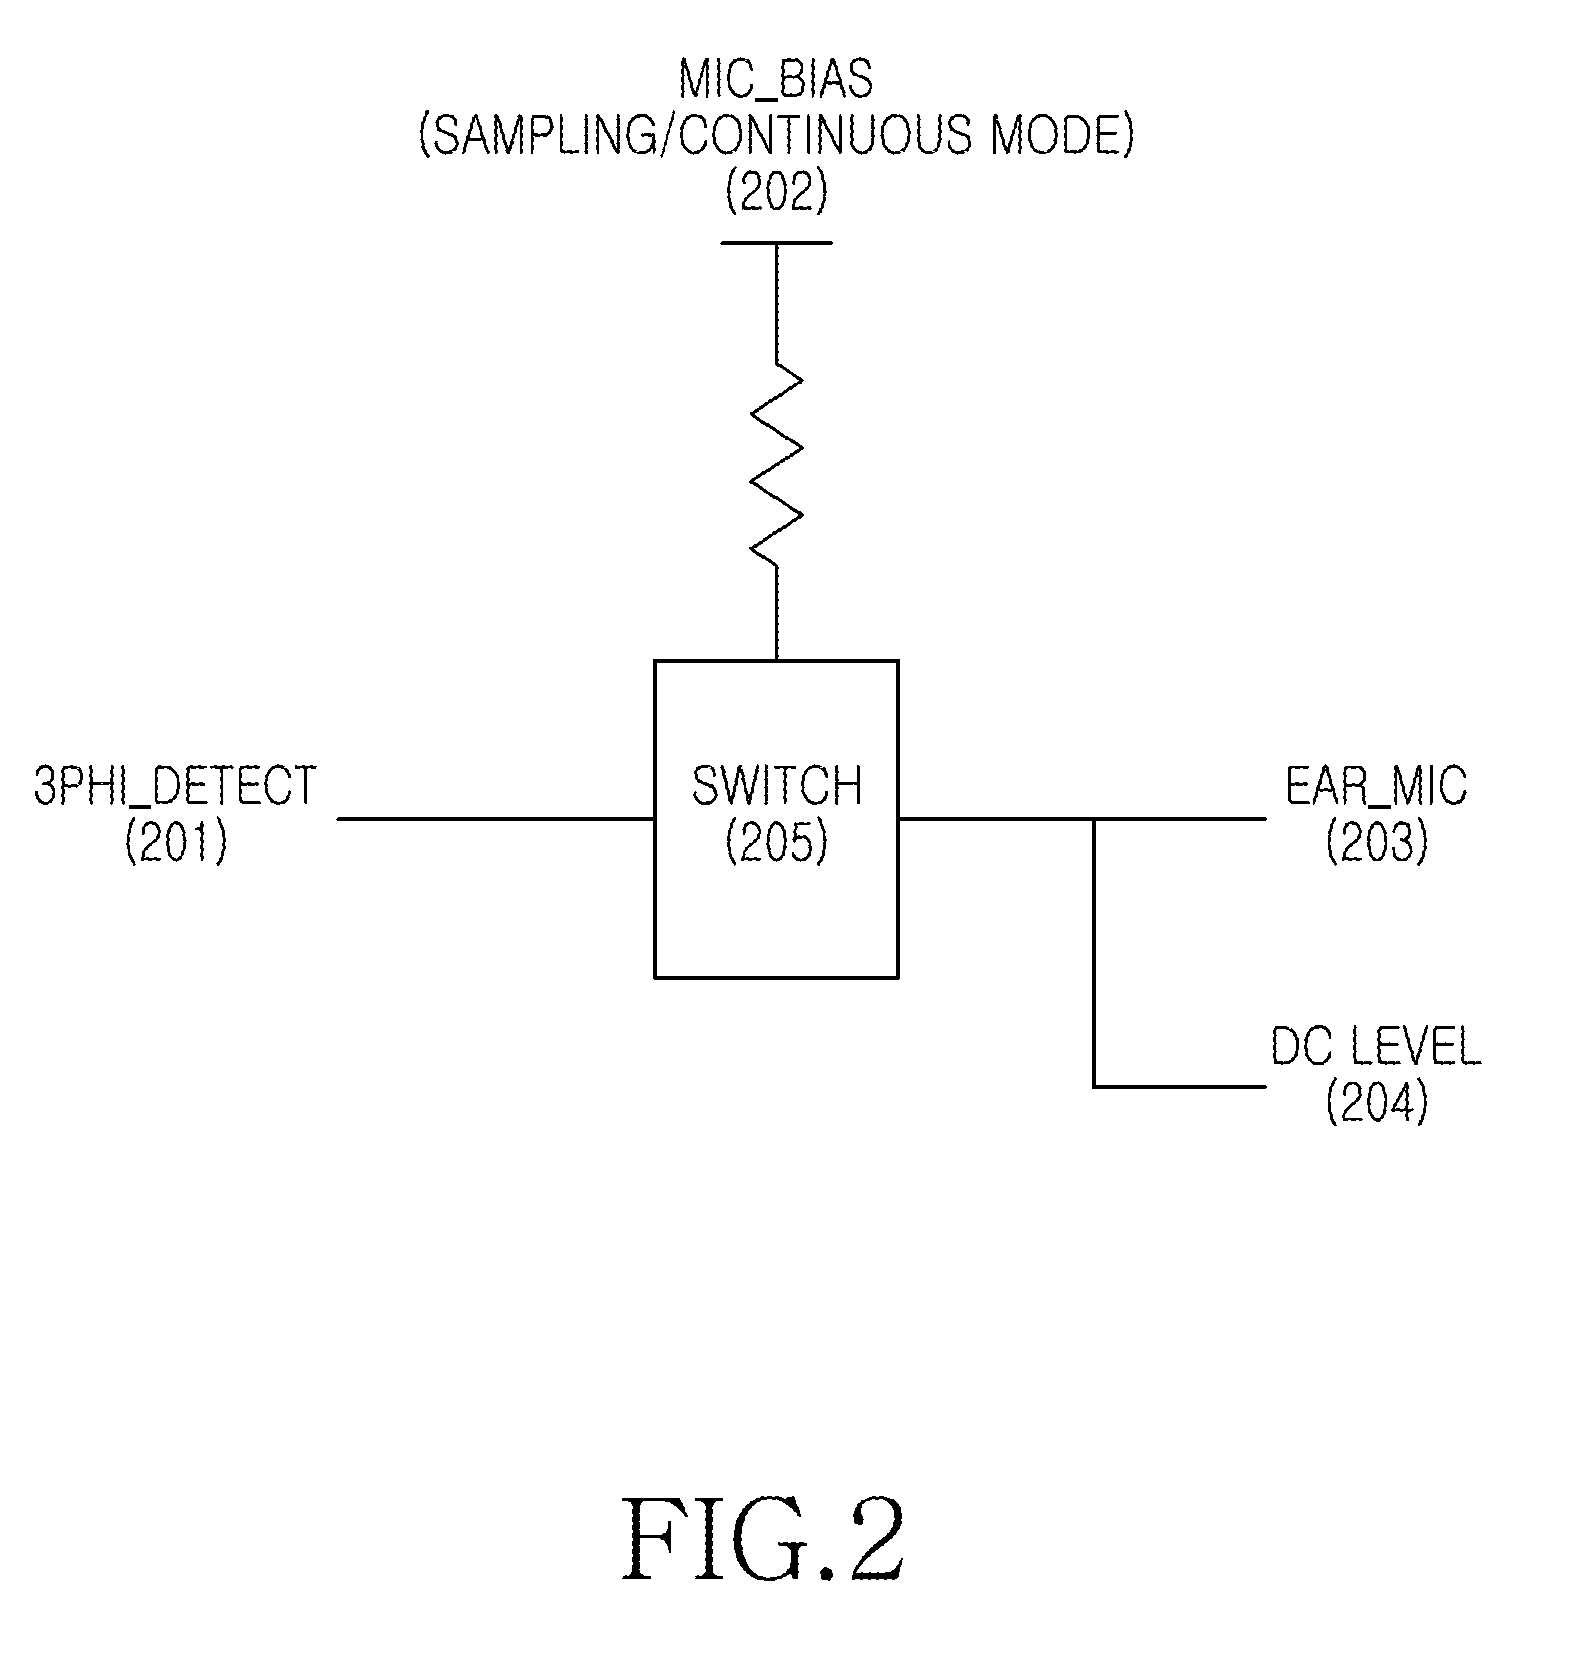 Method and apparatus for preventing wrong recognition of earphone insertion